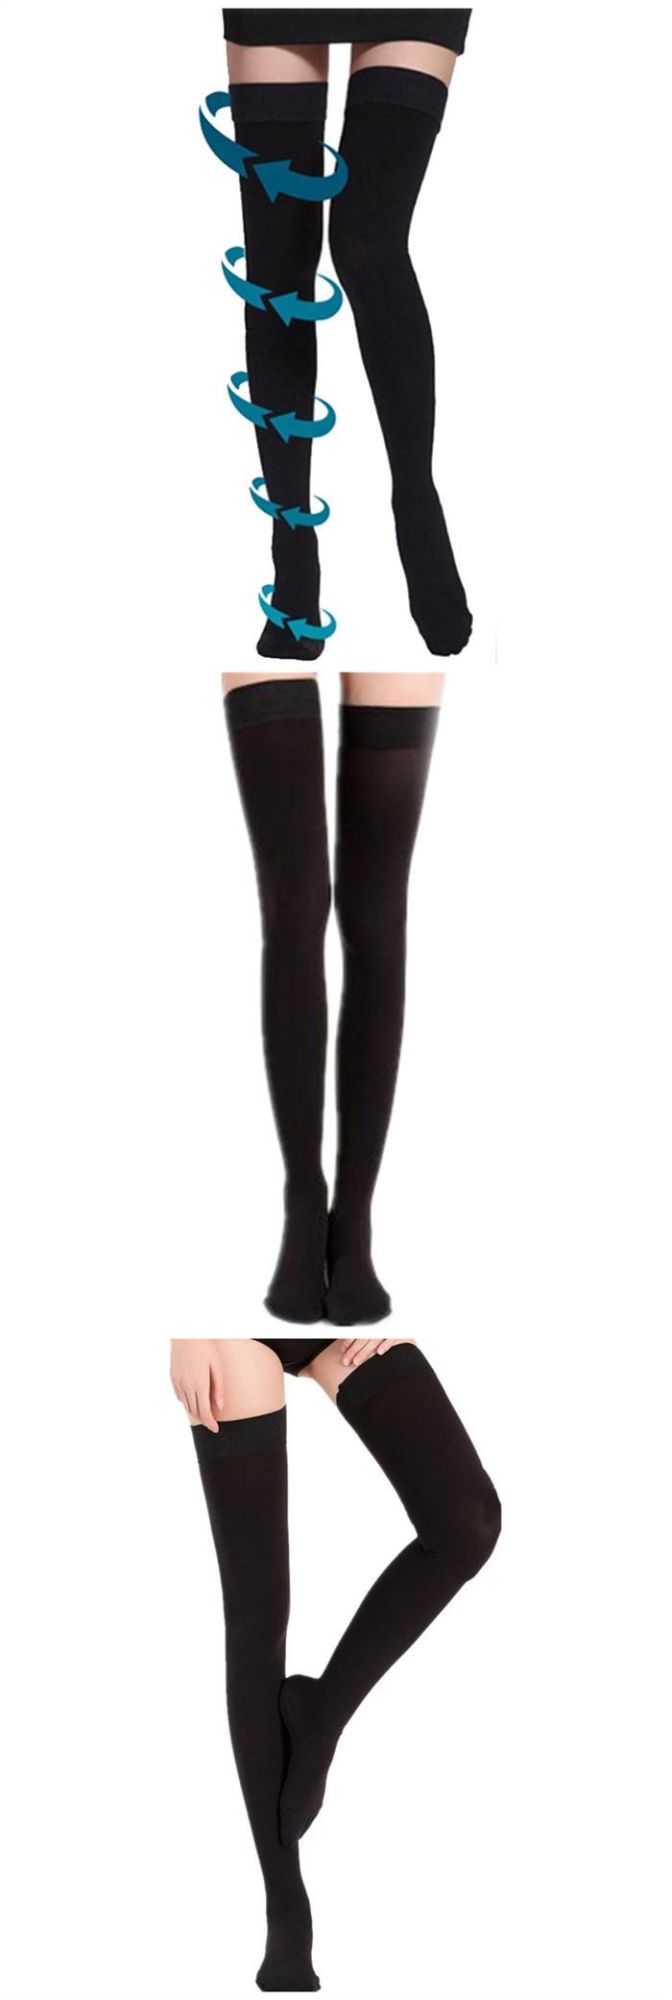 Professional Thigh High 34-46mmhg Varicose Veins Medical Compression Stockings